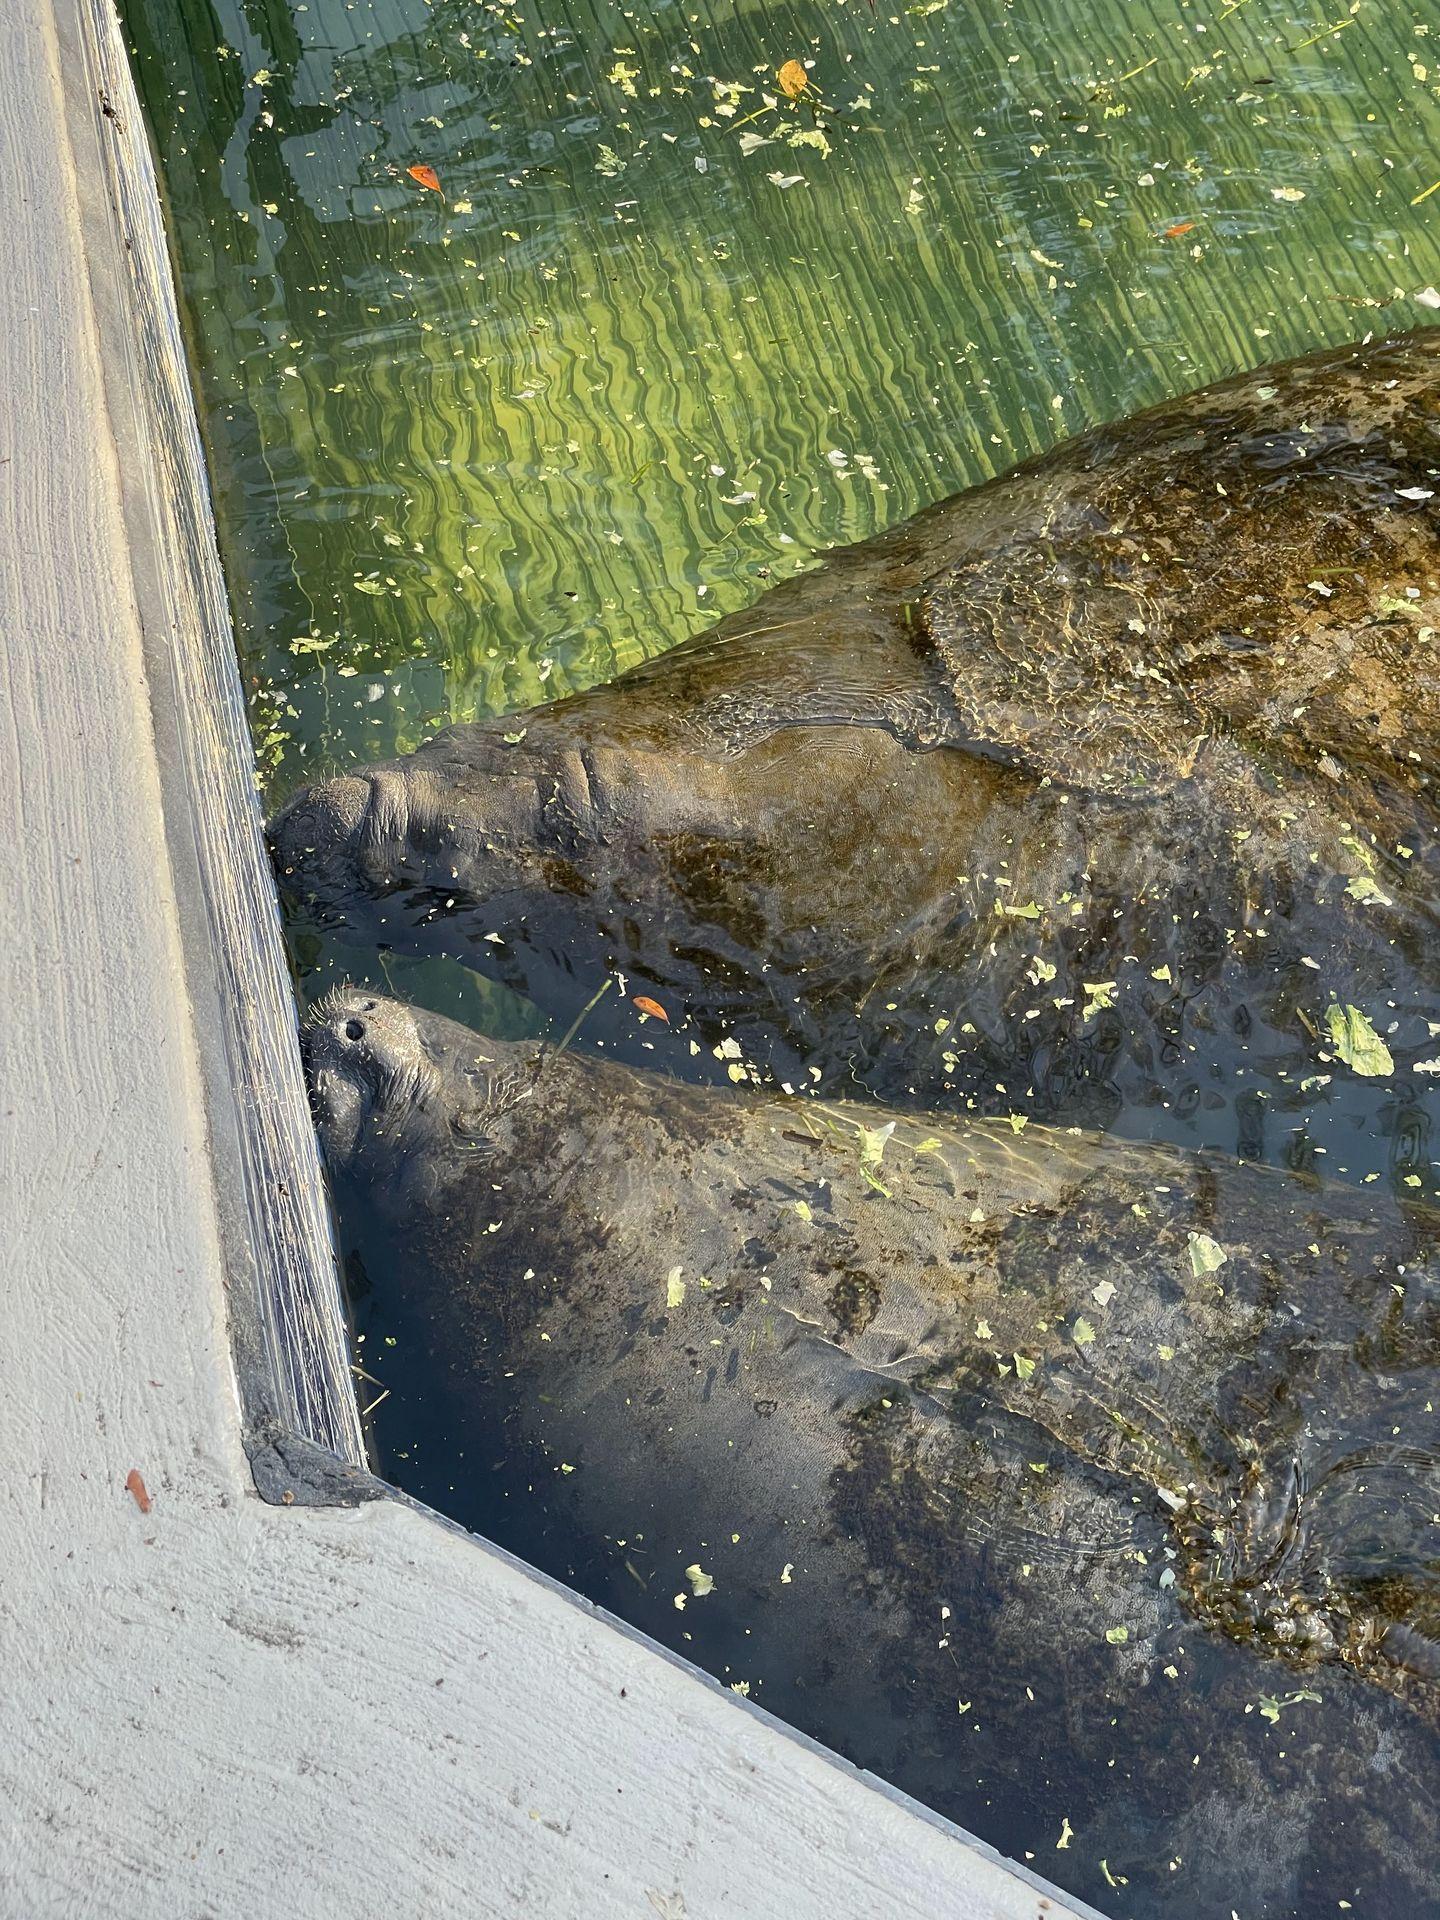 Two manatees eating lettuce that you can see through the glass at Homosassa Springs.